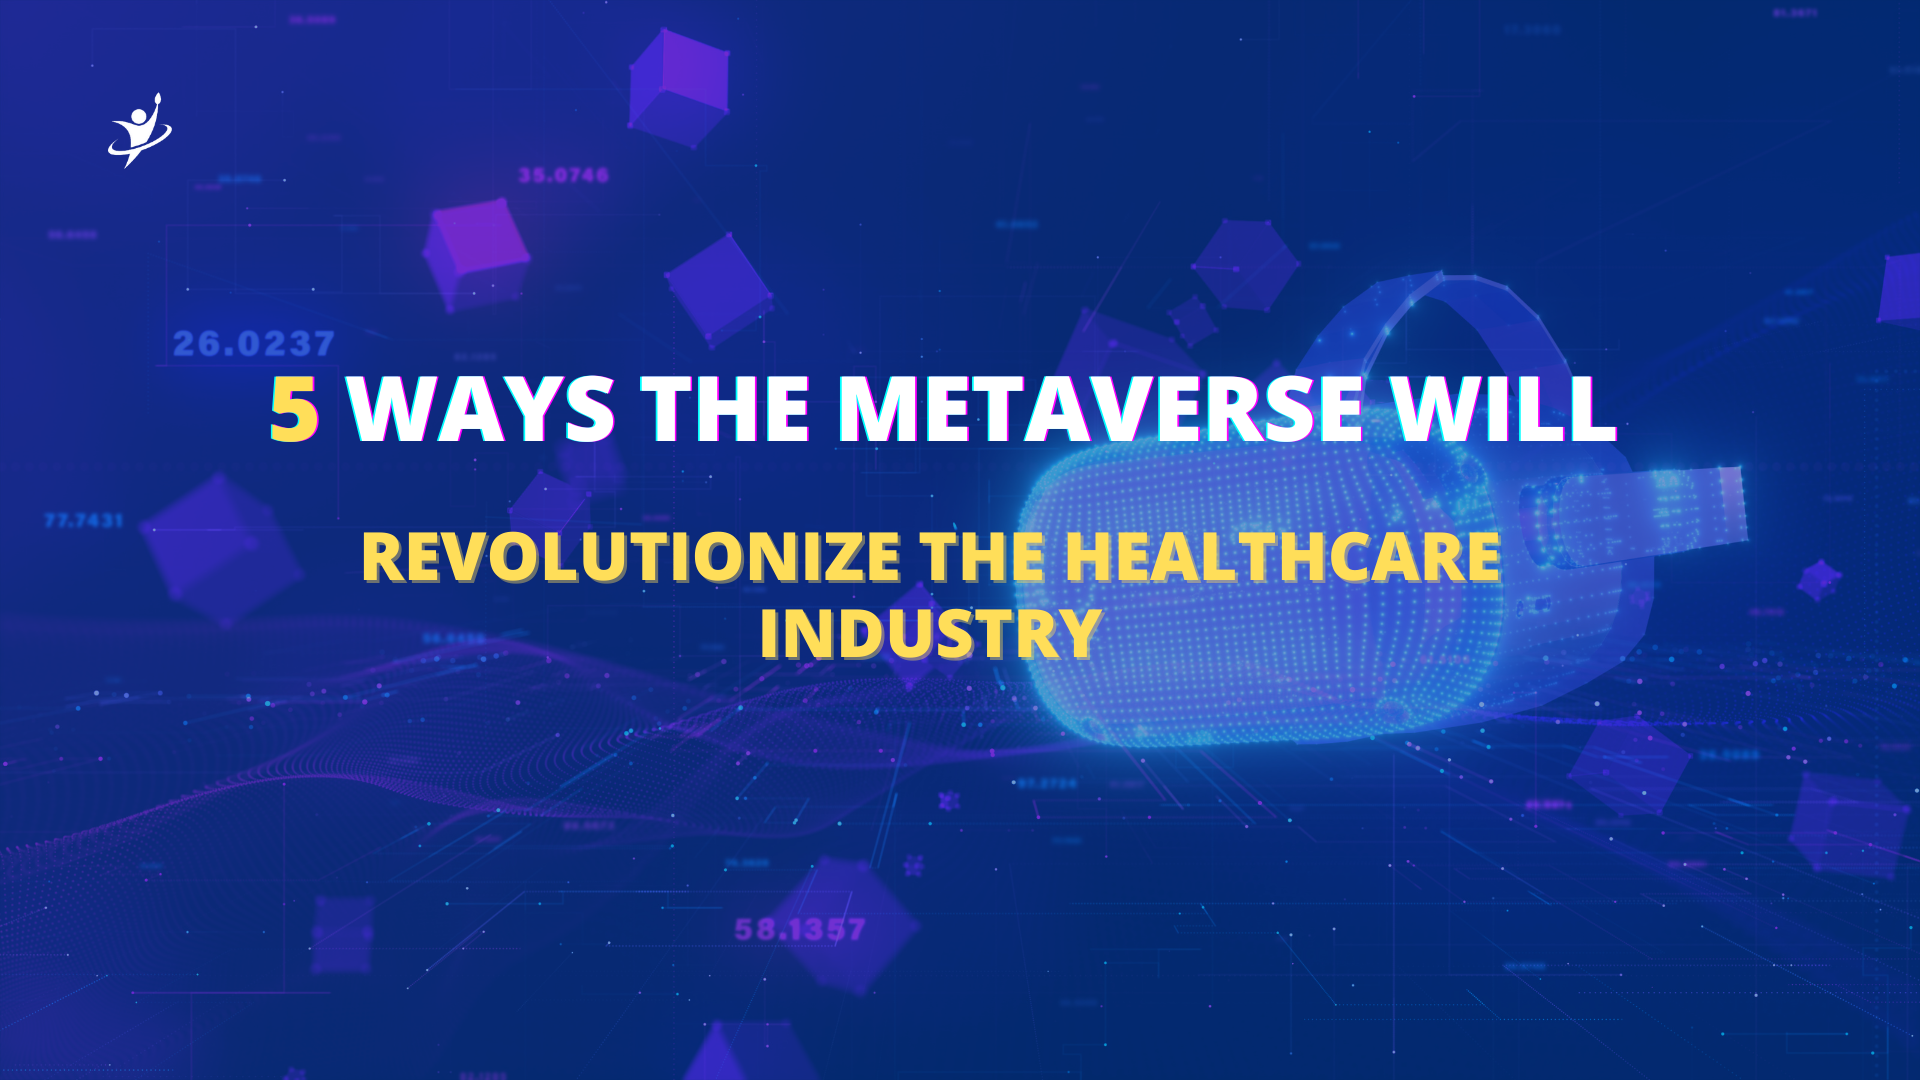 5 Ways the Metaverse Will Revolutionize the Healthcare Industry